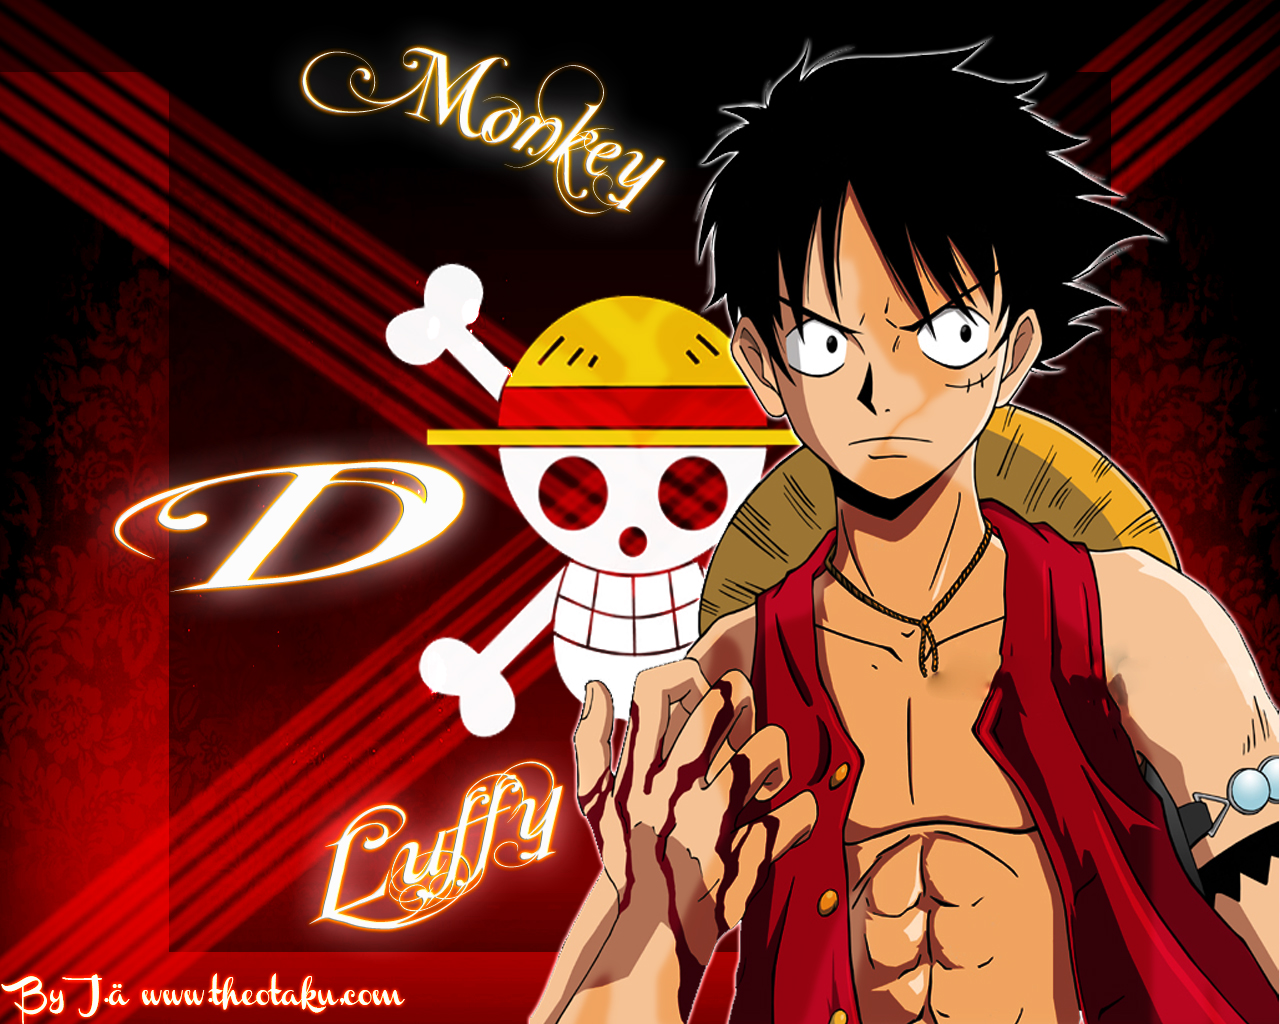 Cool Wallpaper For You: some coo of luffy wallpaper